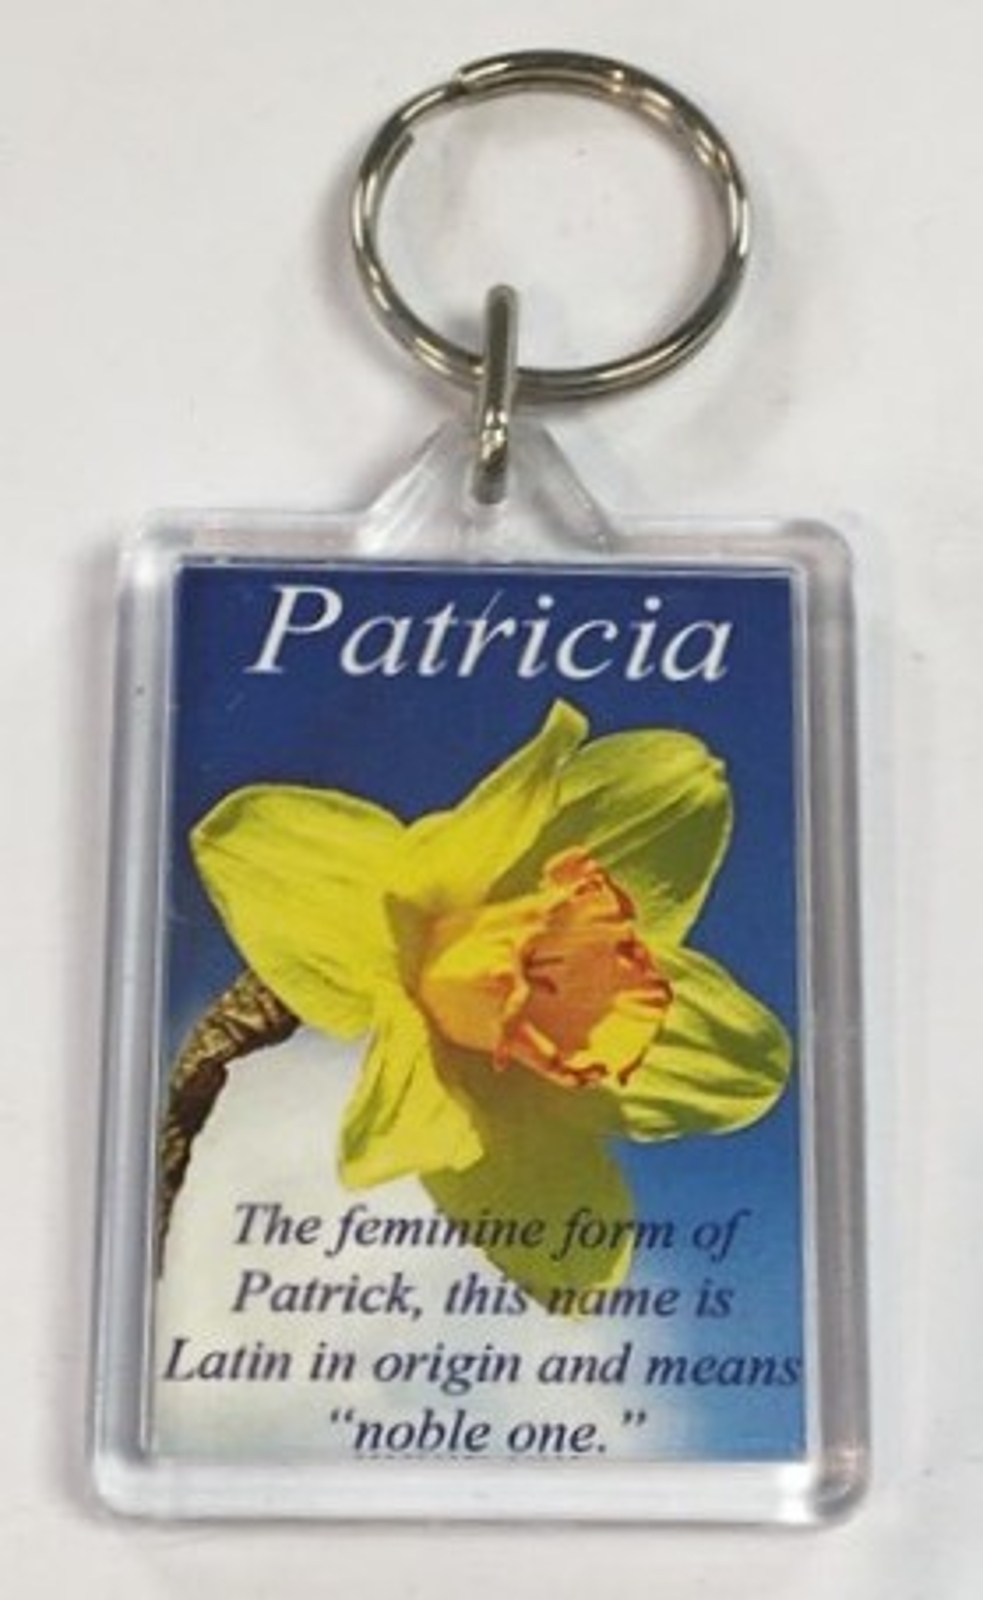 Patricia - Welsh Name Meaning Keyring - £1.99 - Welsh Gifts